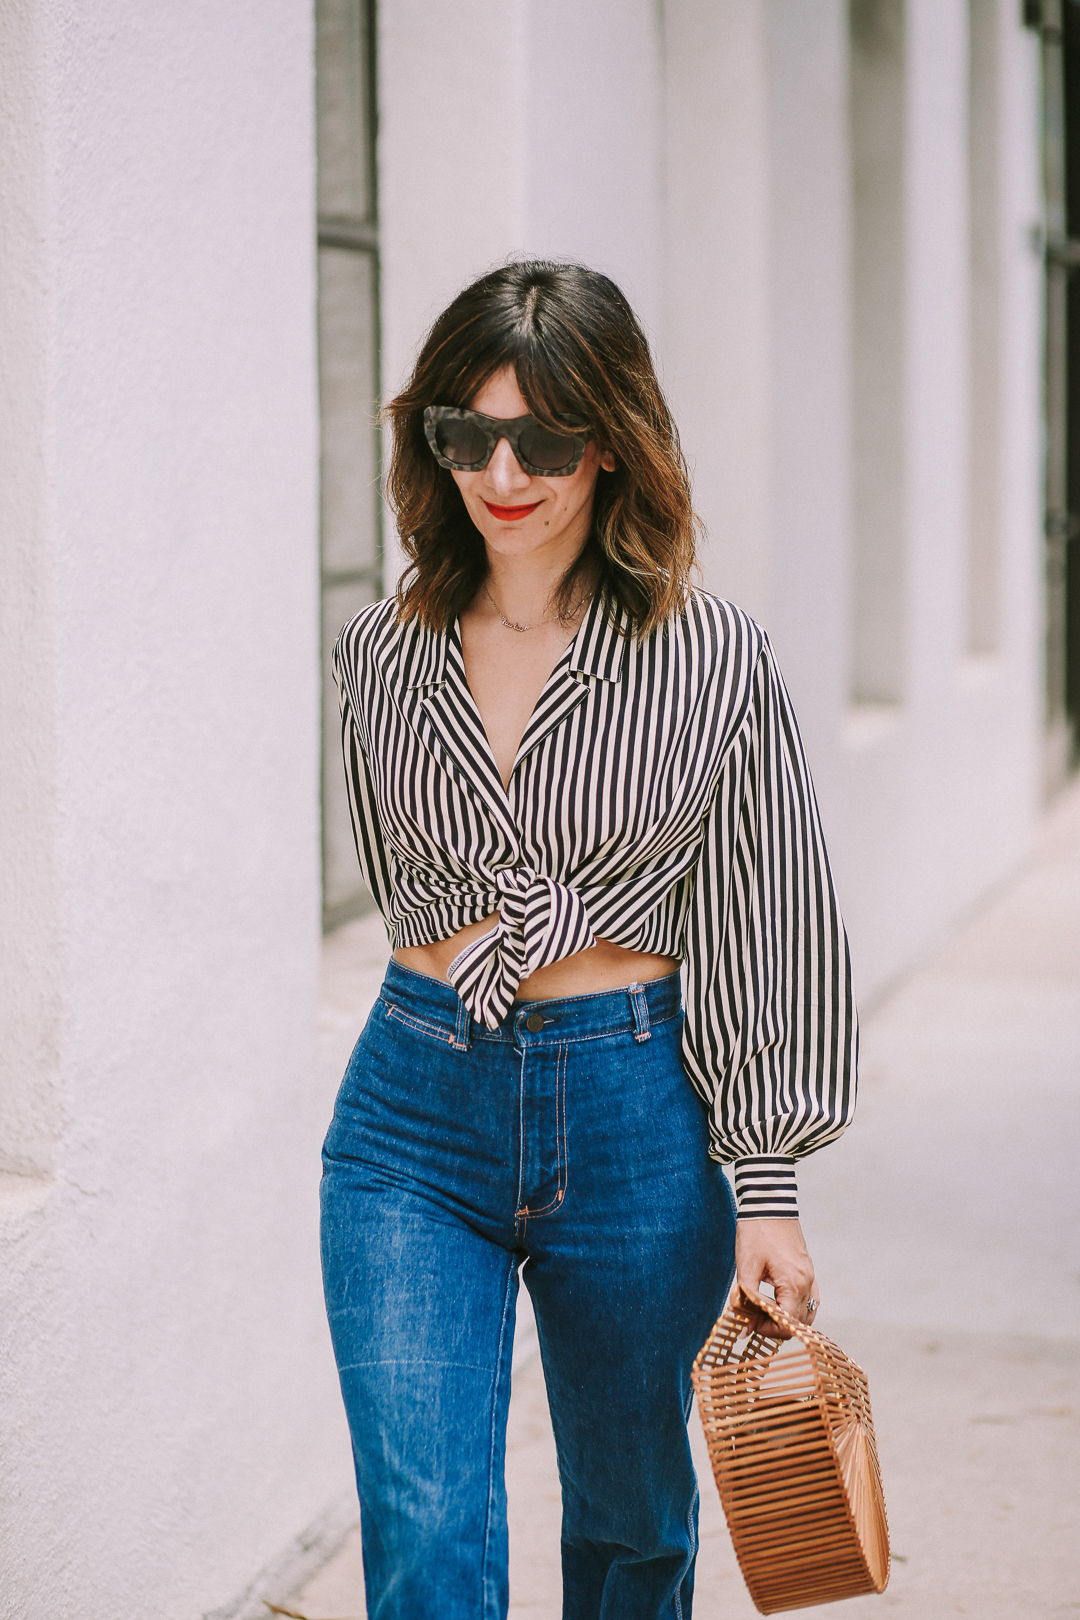 how to style a striped shirt casually